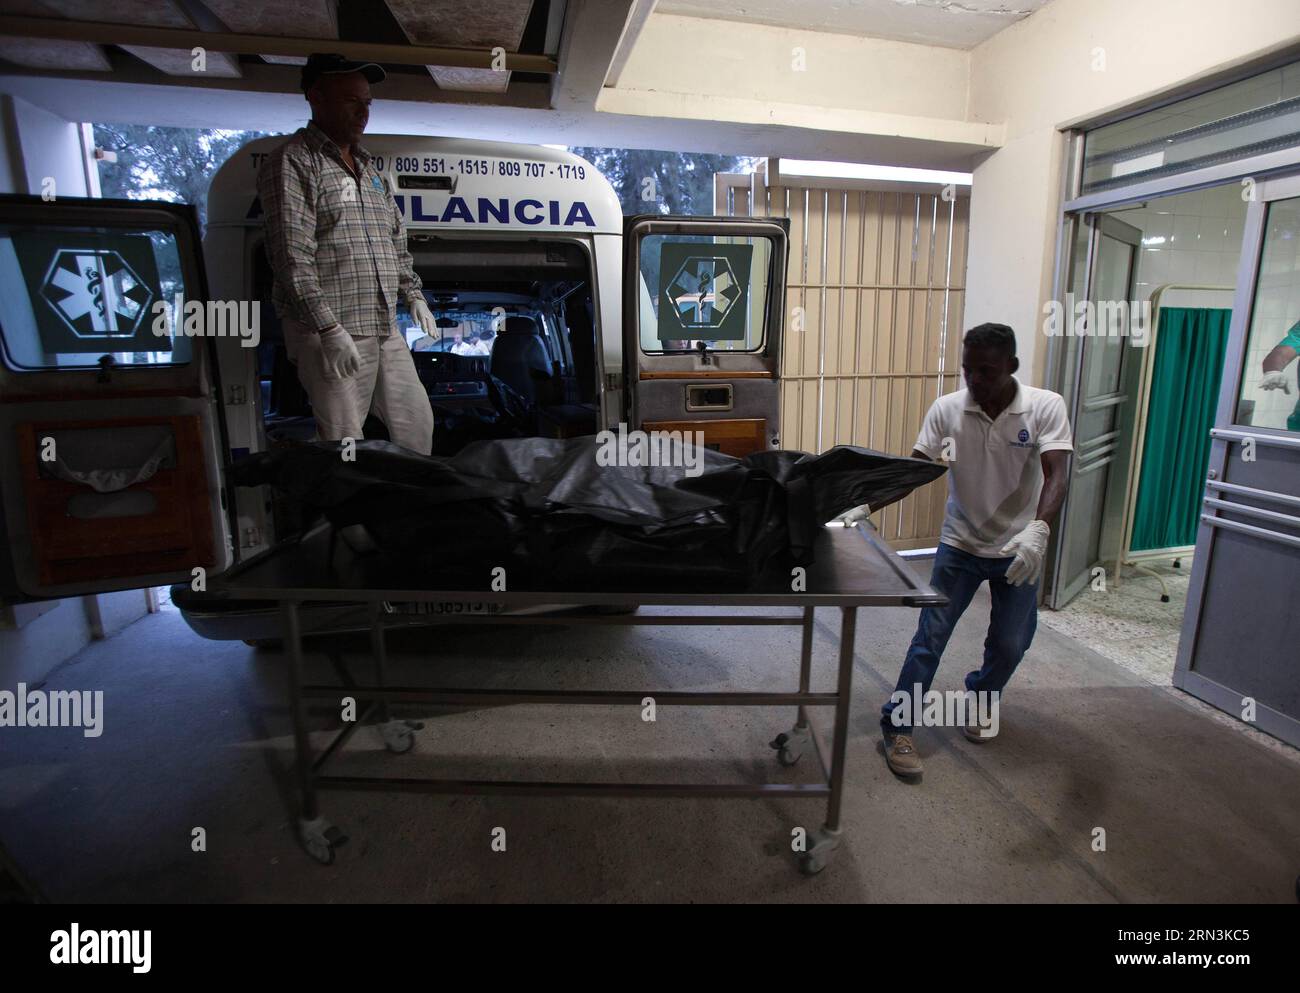 (150421) -- SANTO DOMINGO, April 20, 2015 -- People move the bodies of the victims of a plane accident, in the Pathology Center of the Cristo Redentor Cementery, in Santo Domingo, Dominican Republic, on April 20, 2015. Four Spanish and two British tourists died in the accident of a plane that occurred on Monday in Dominican Republic, local authorities confirmed. The accident happened after 08:00, local hour, when the type PA-32 plane, registration number HI-957, precipitated to the ground and caught fire, close to a residential zone of the touristic locality of Punta Cana, leaving no survivors Stock Photo